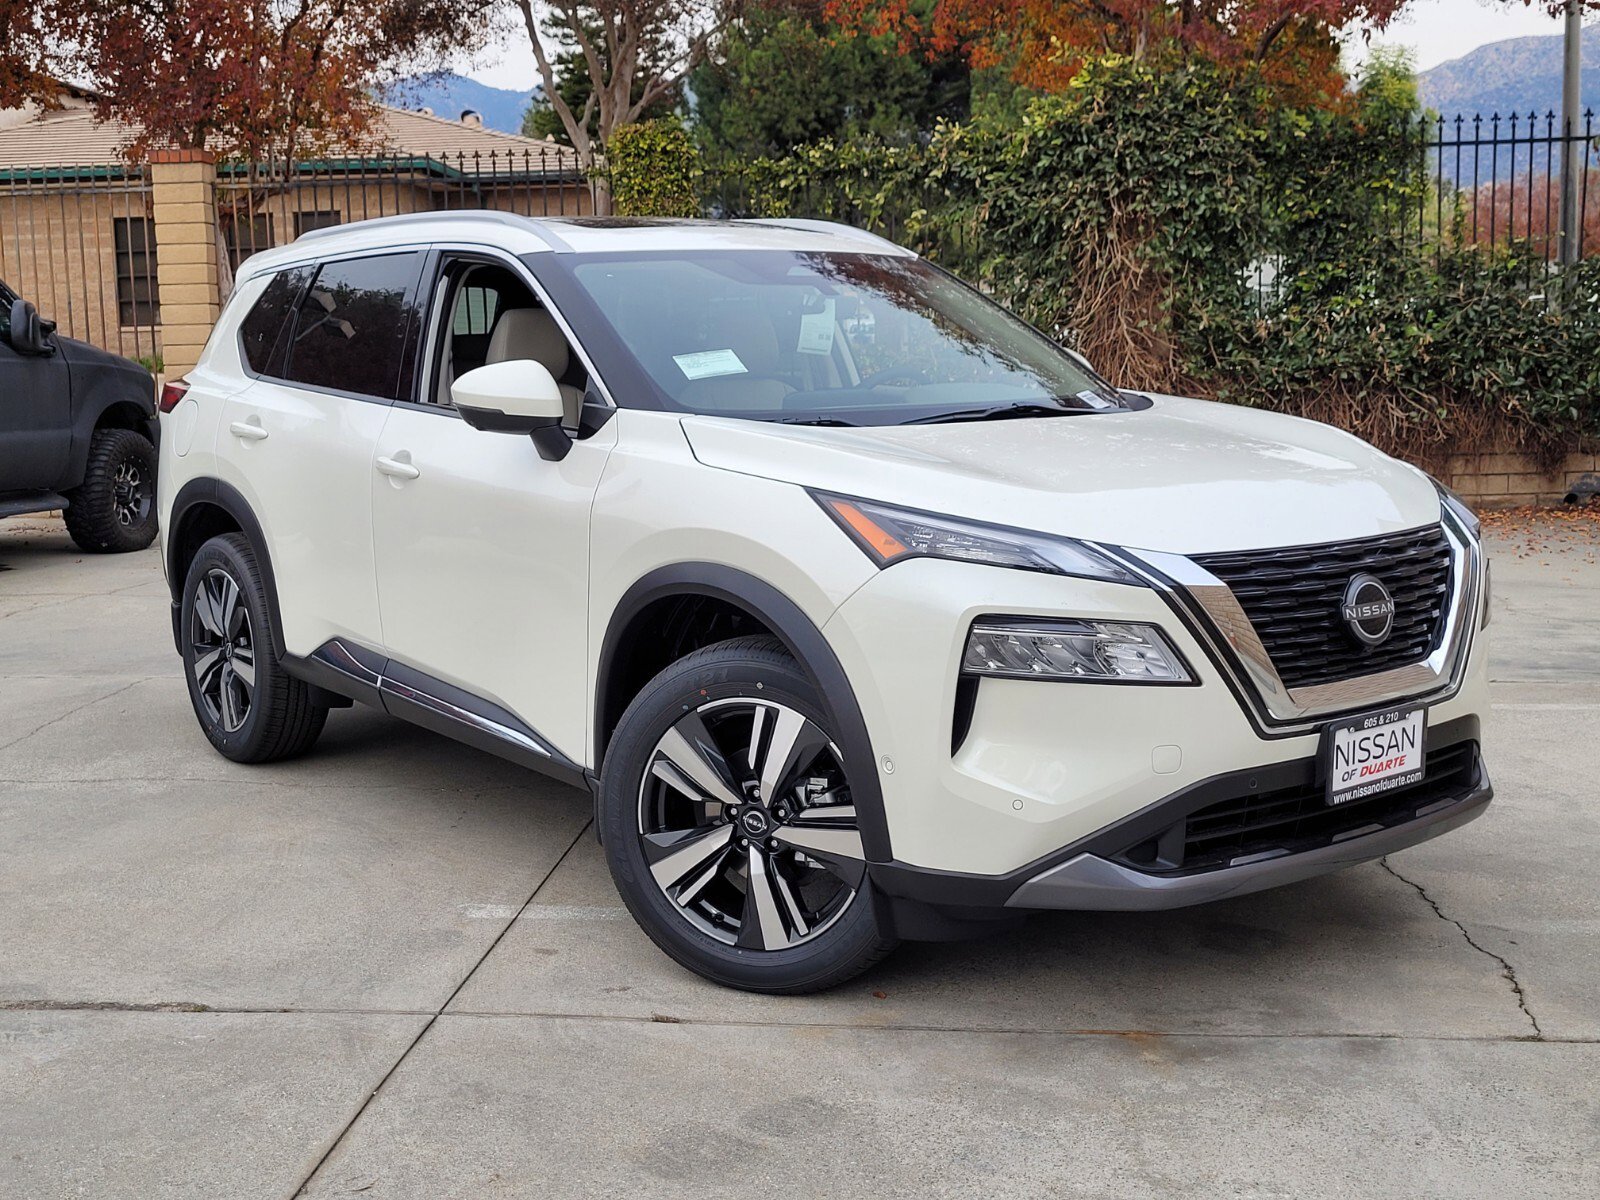 New 2023 Nissan Rogue SL Crossover in Duarte #PW407154 | Nissan of Duarte